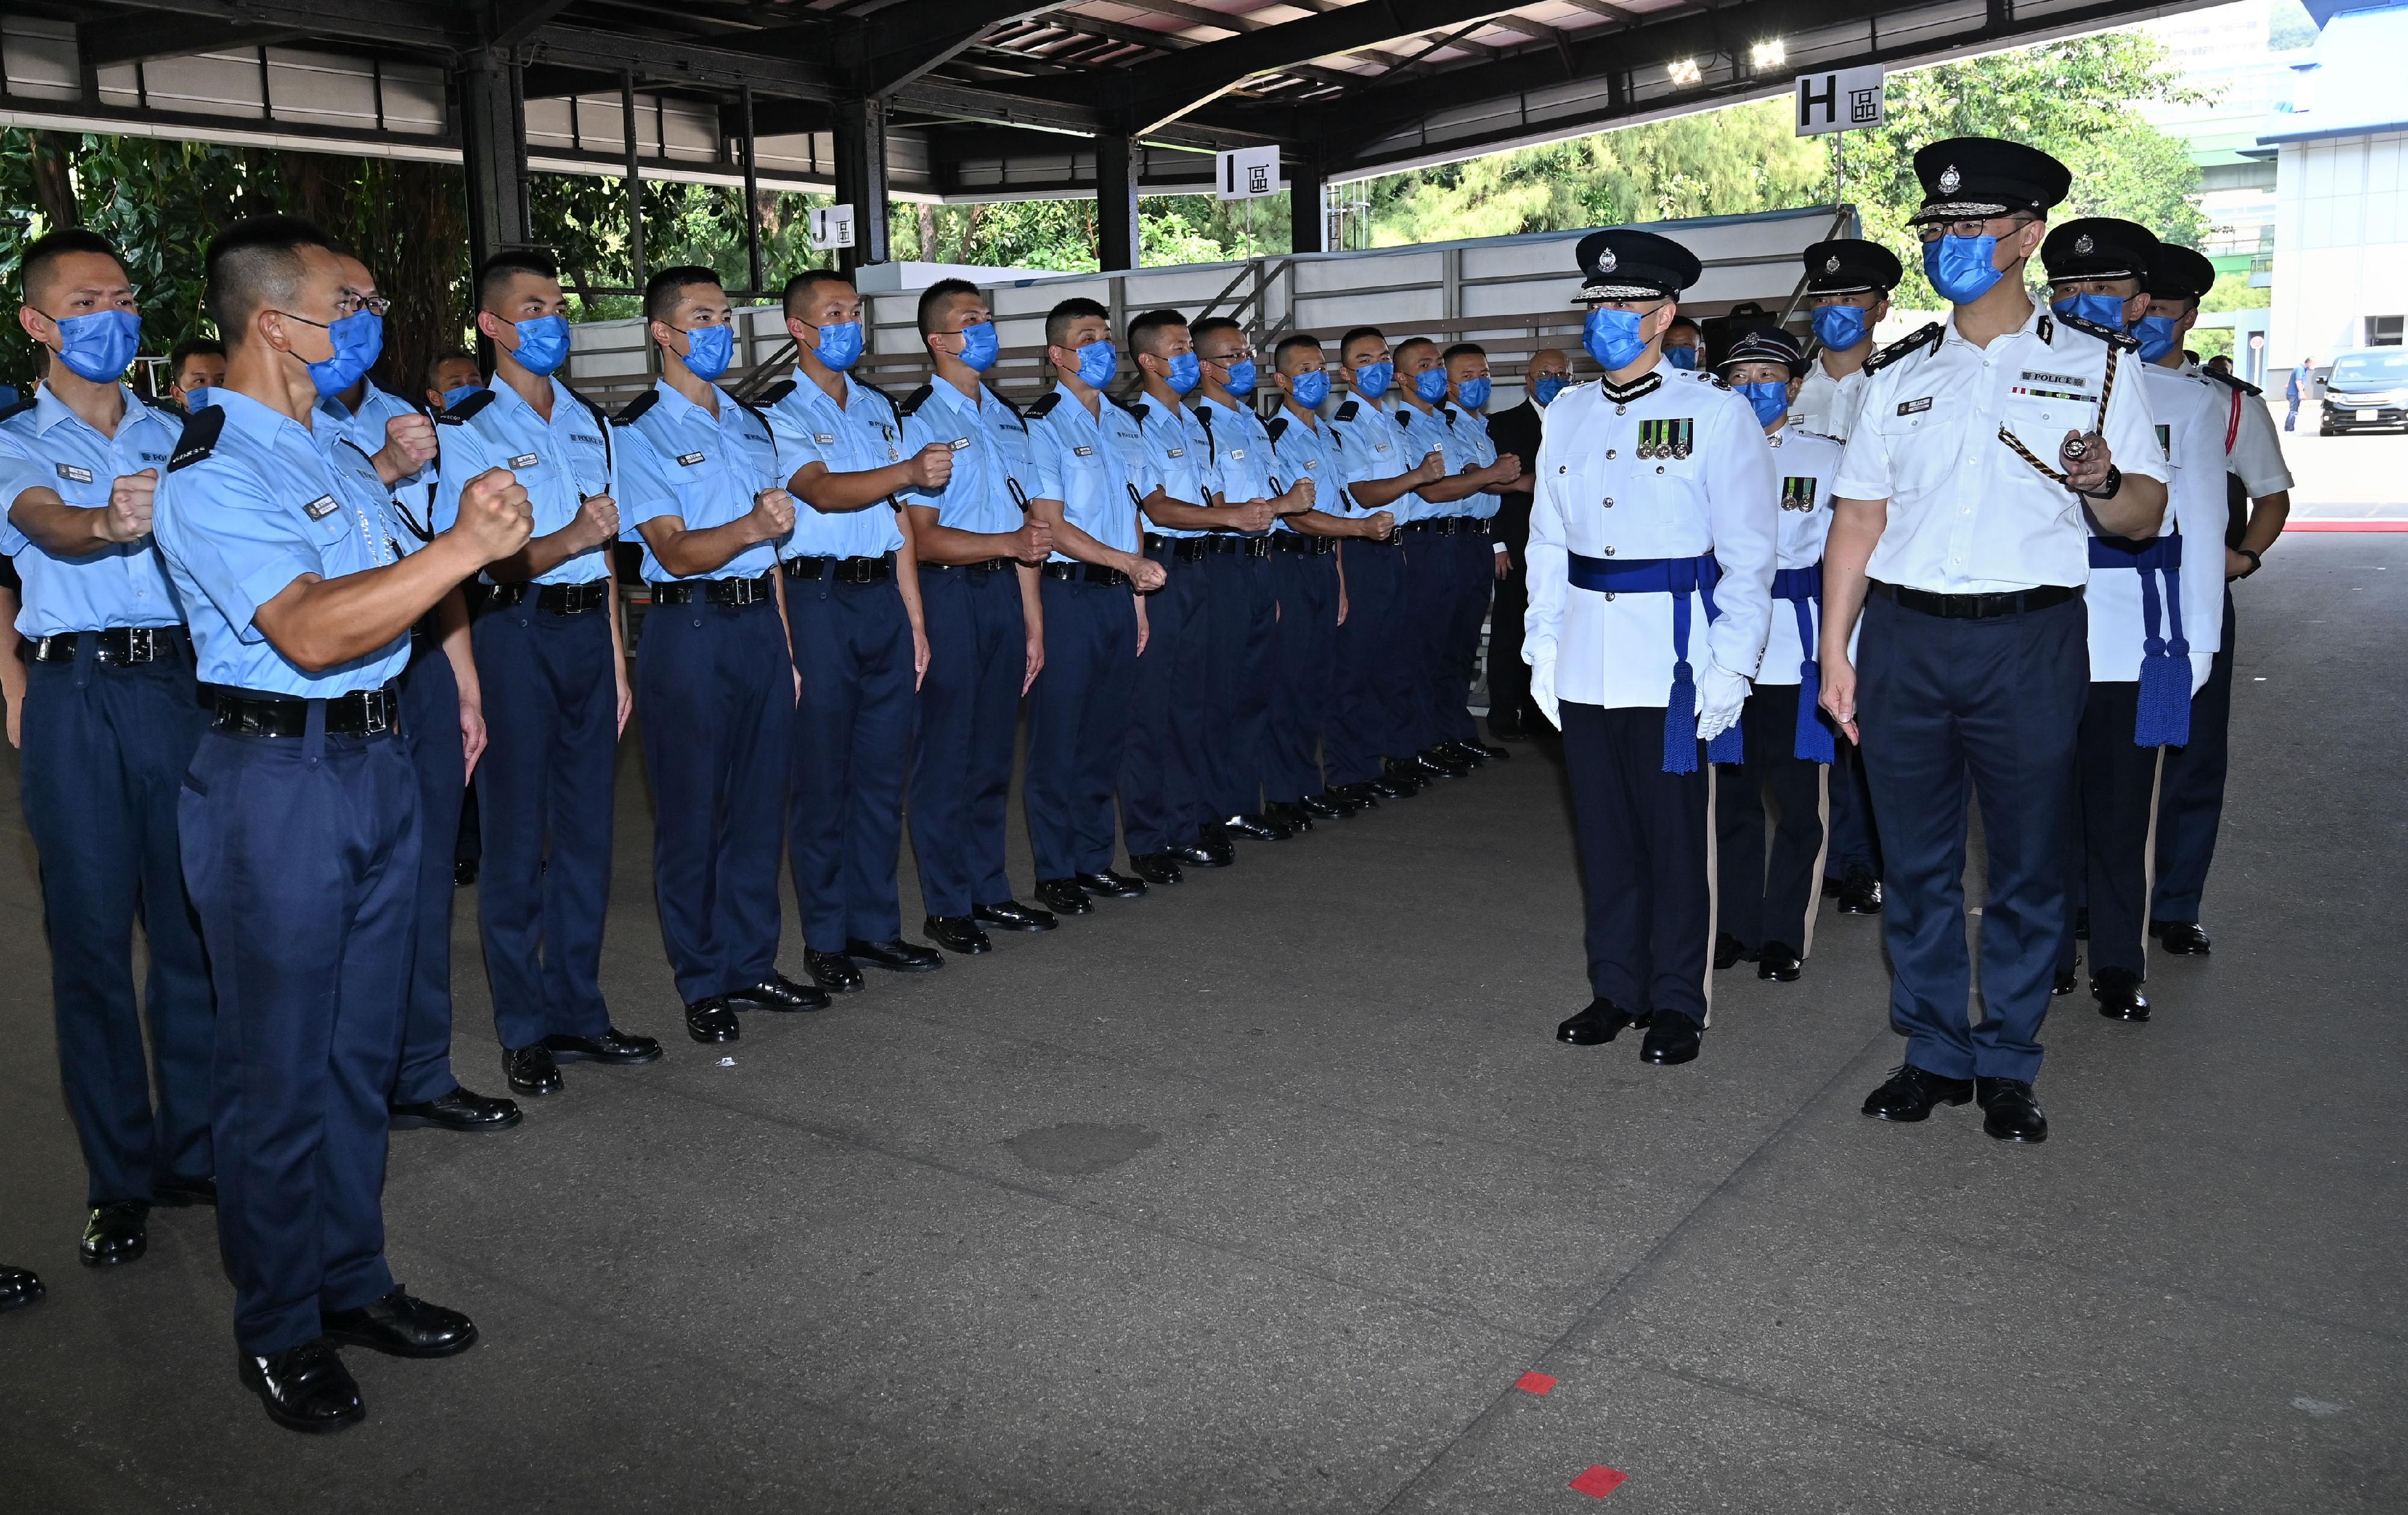 The Commissioner of Police, Mr Siu Chak-yee (first right), and the Deputy Commissioner of Police (Management), Mr Chow Yat-ming (second right), meet the graduates after the passing-out parade held at the Hong Kong Police College today (September 17).
